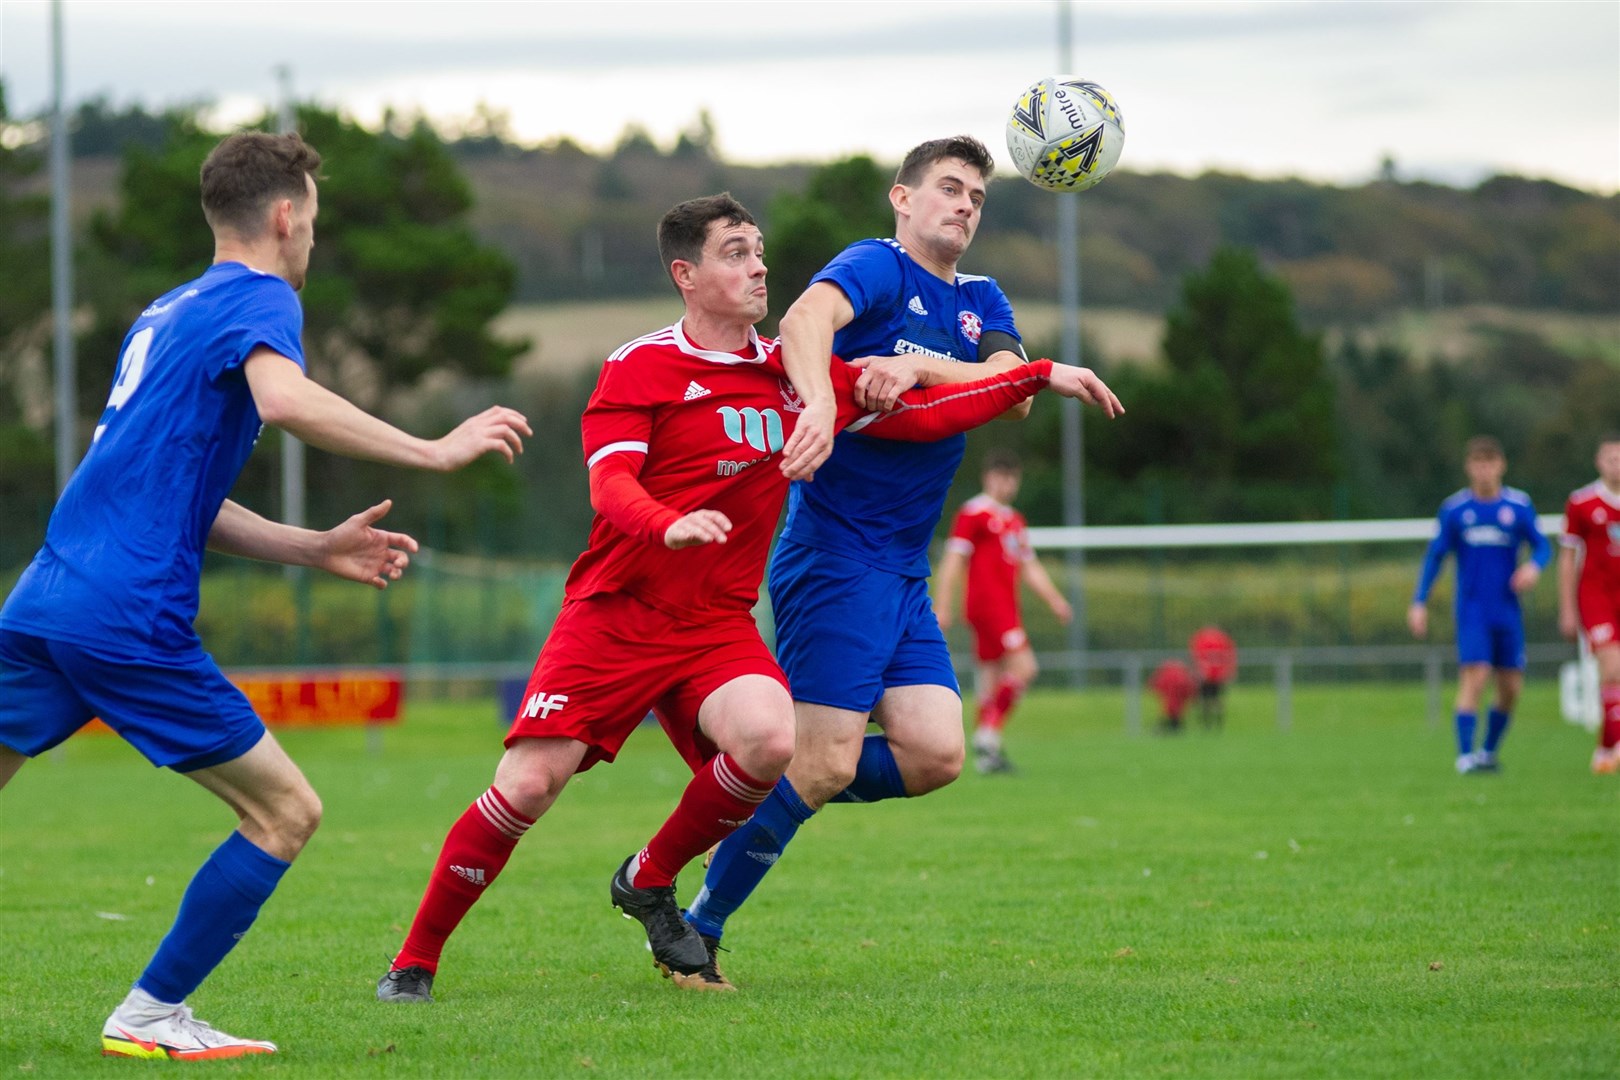 Vale's Ben Allan and Lossie's Liam Archibald tussle for the ball...Deveronvale FC (6) vs Lossiemouth FC (0) - Highland Football League - Princess Royal Park, Banff 23/10/2021...Picture: Daniel Forsyth..